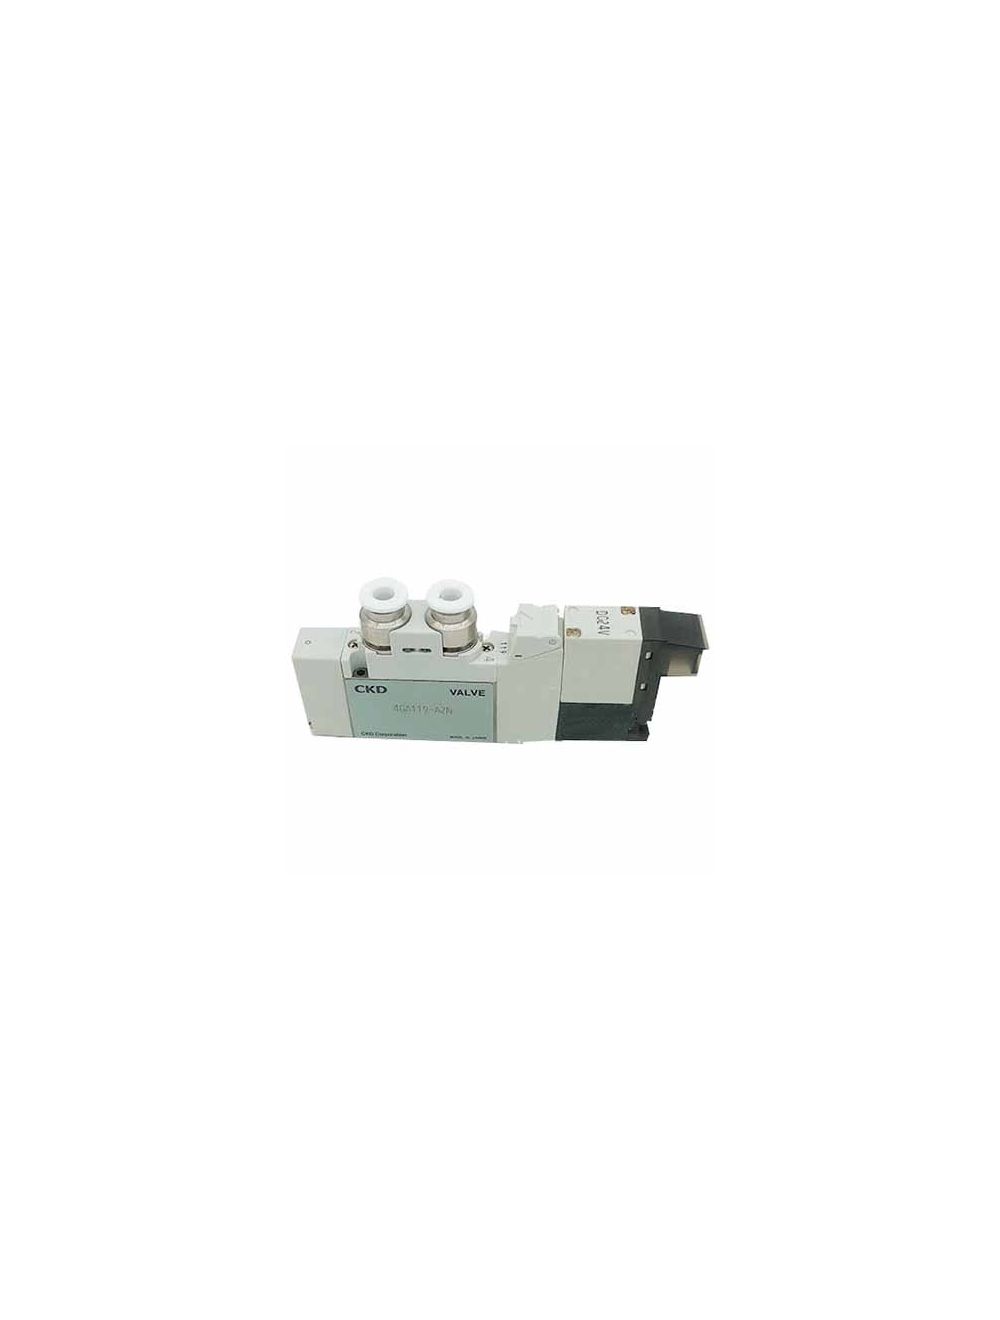 New In stock for sale, CKD Solenoid Valve 4GA119-A2N